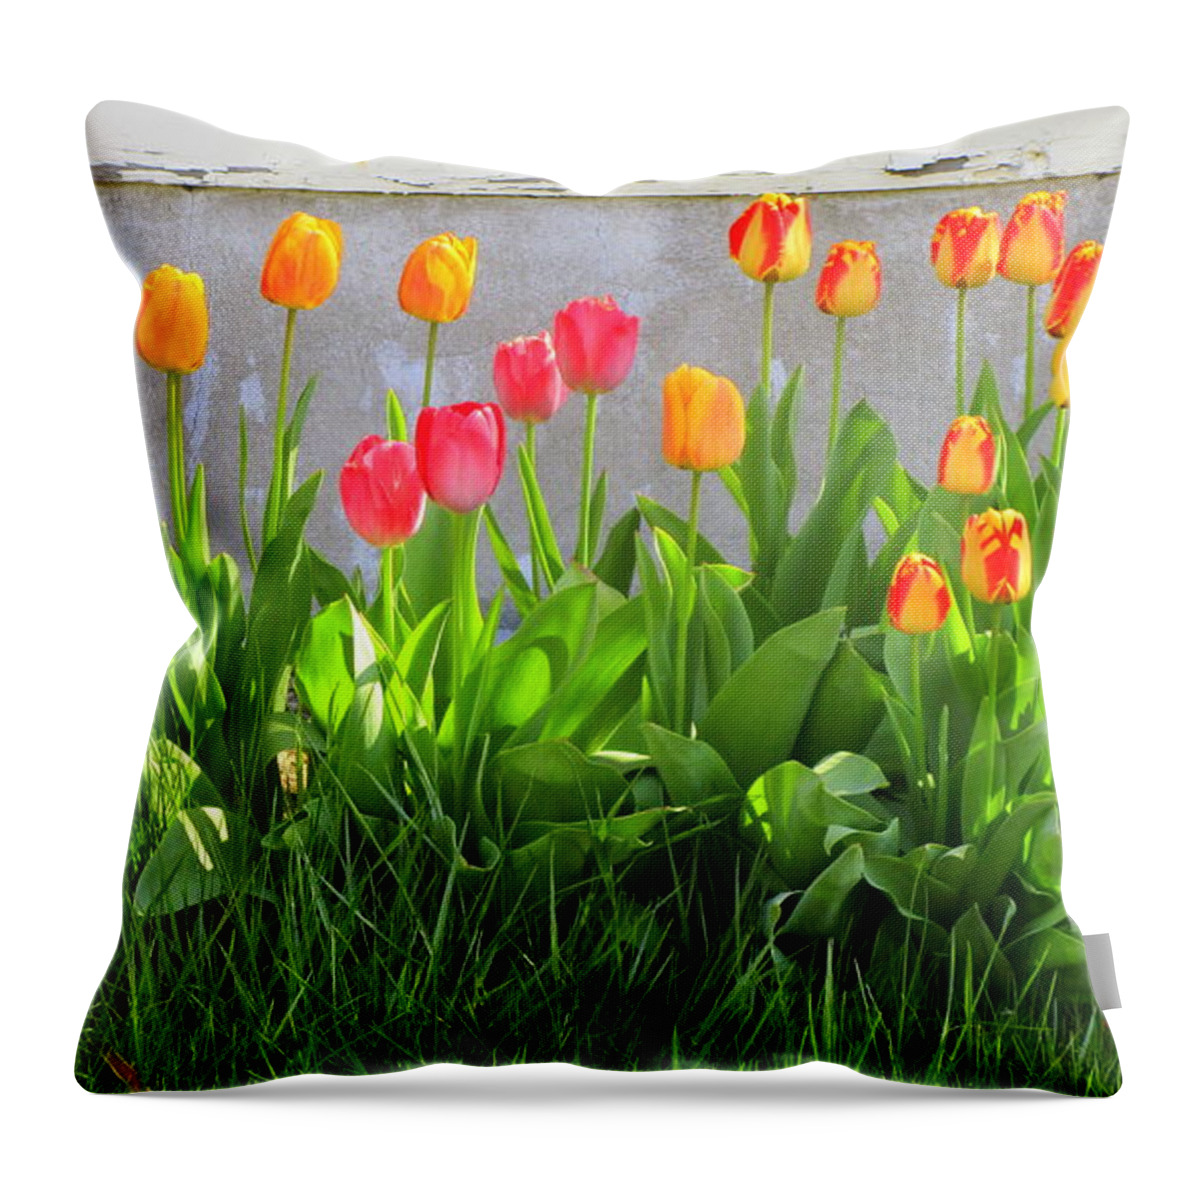 Twenty-five Tulips Throw Pillow featuring the photograph Twenty-Five Tulips by Suzanne DeGeorge